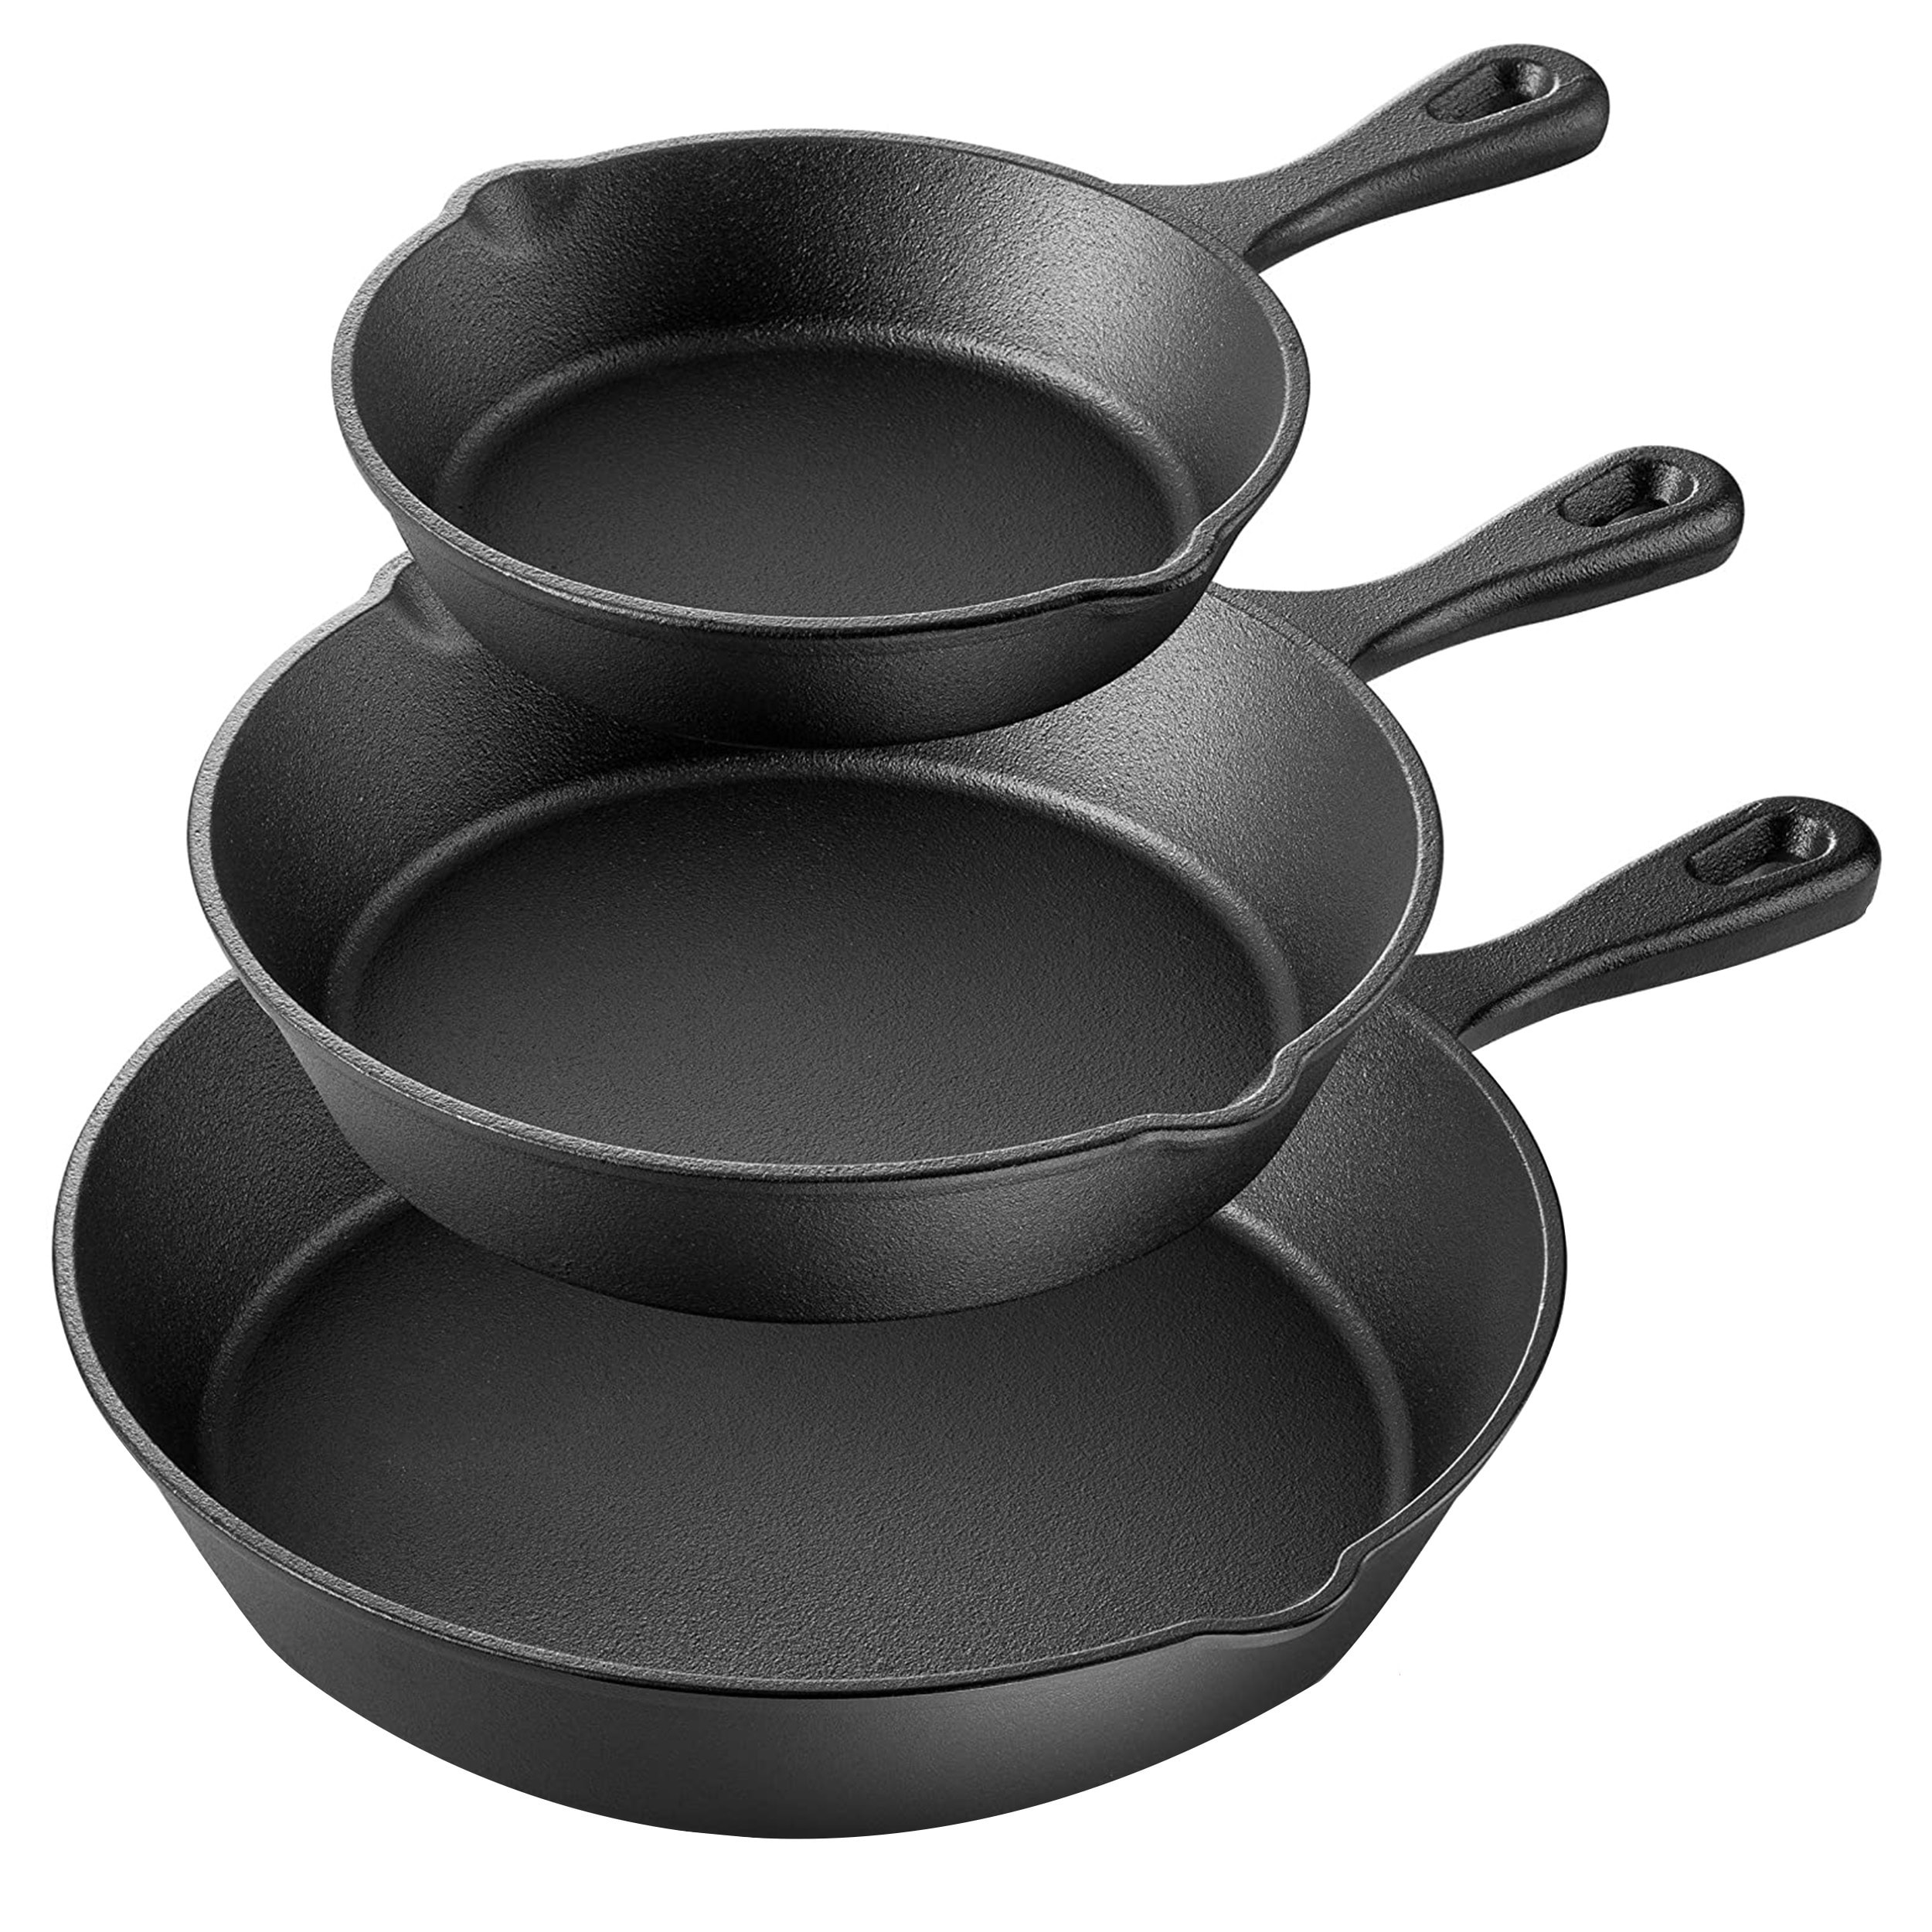 https://ak1.ostkcdn.com/images/products/is/images/direct/4c6e5f1ebd6a20c496dadf1e5fe69c0976f1e079/Pre-Seasoned-Cast-Iron-Skillet-3-Piece-Set.jpg